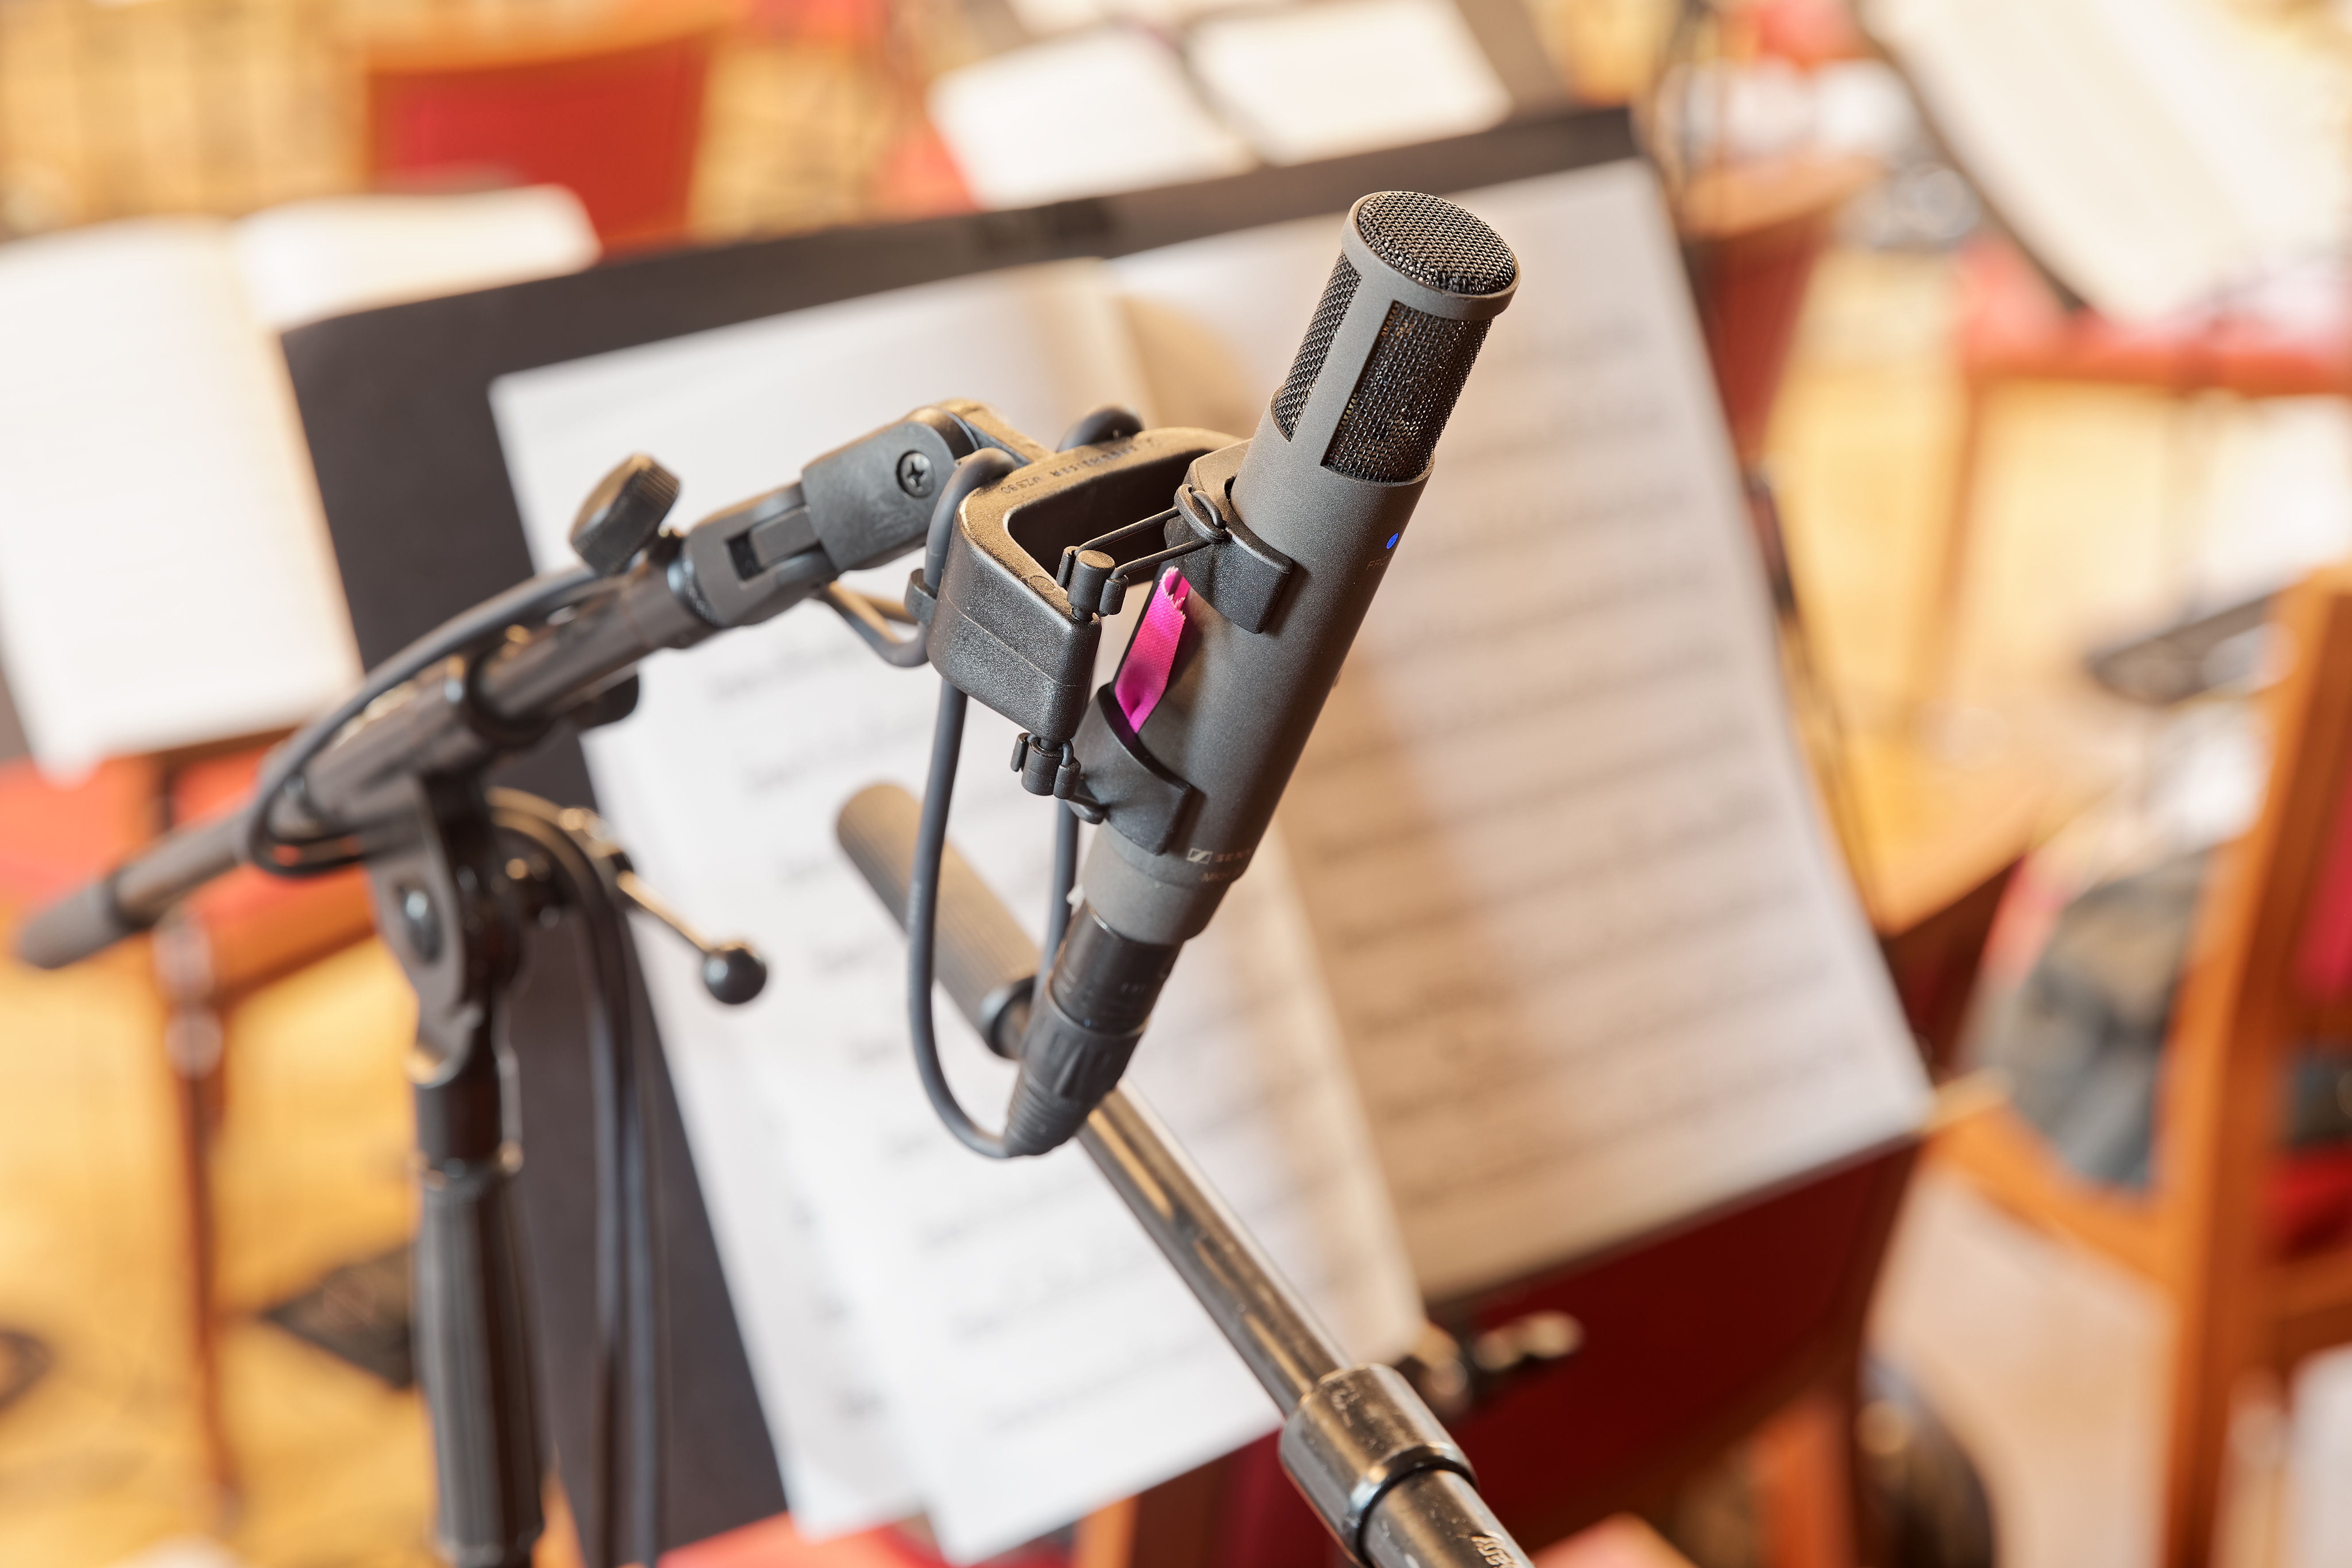 The VR recording will open up new perspectives on the work of an orchestra